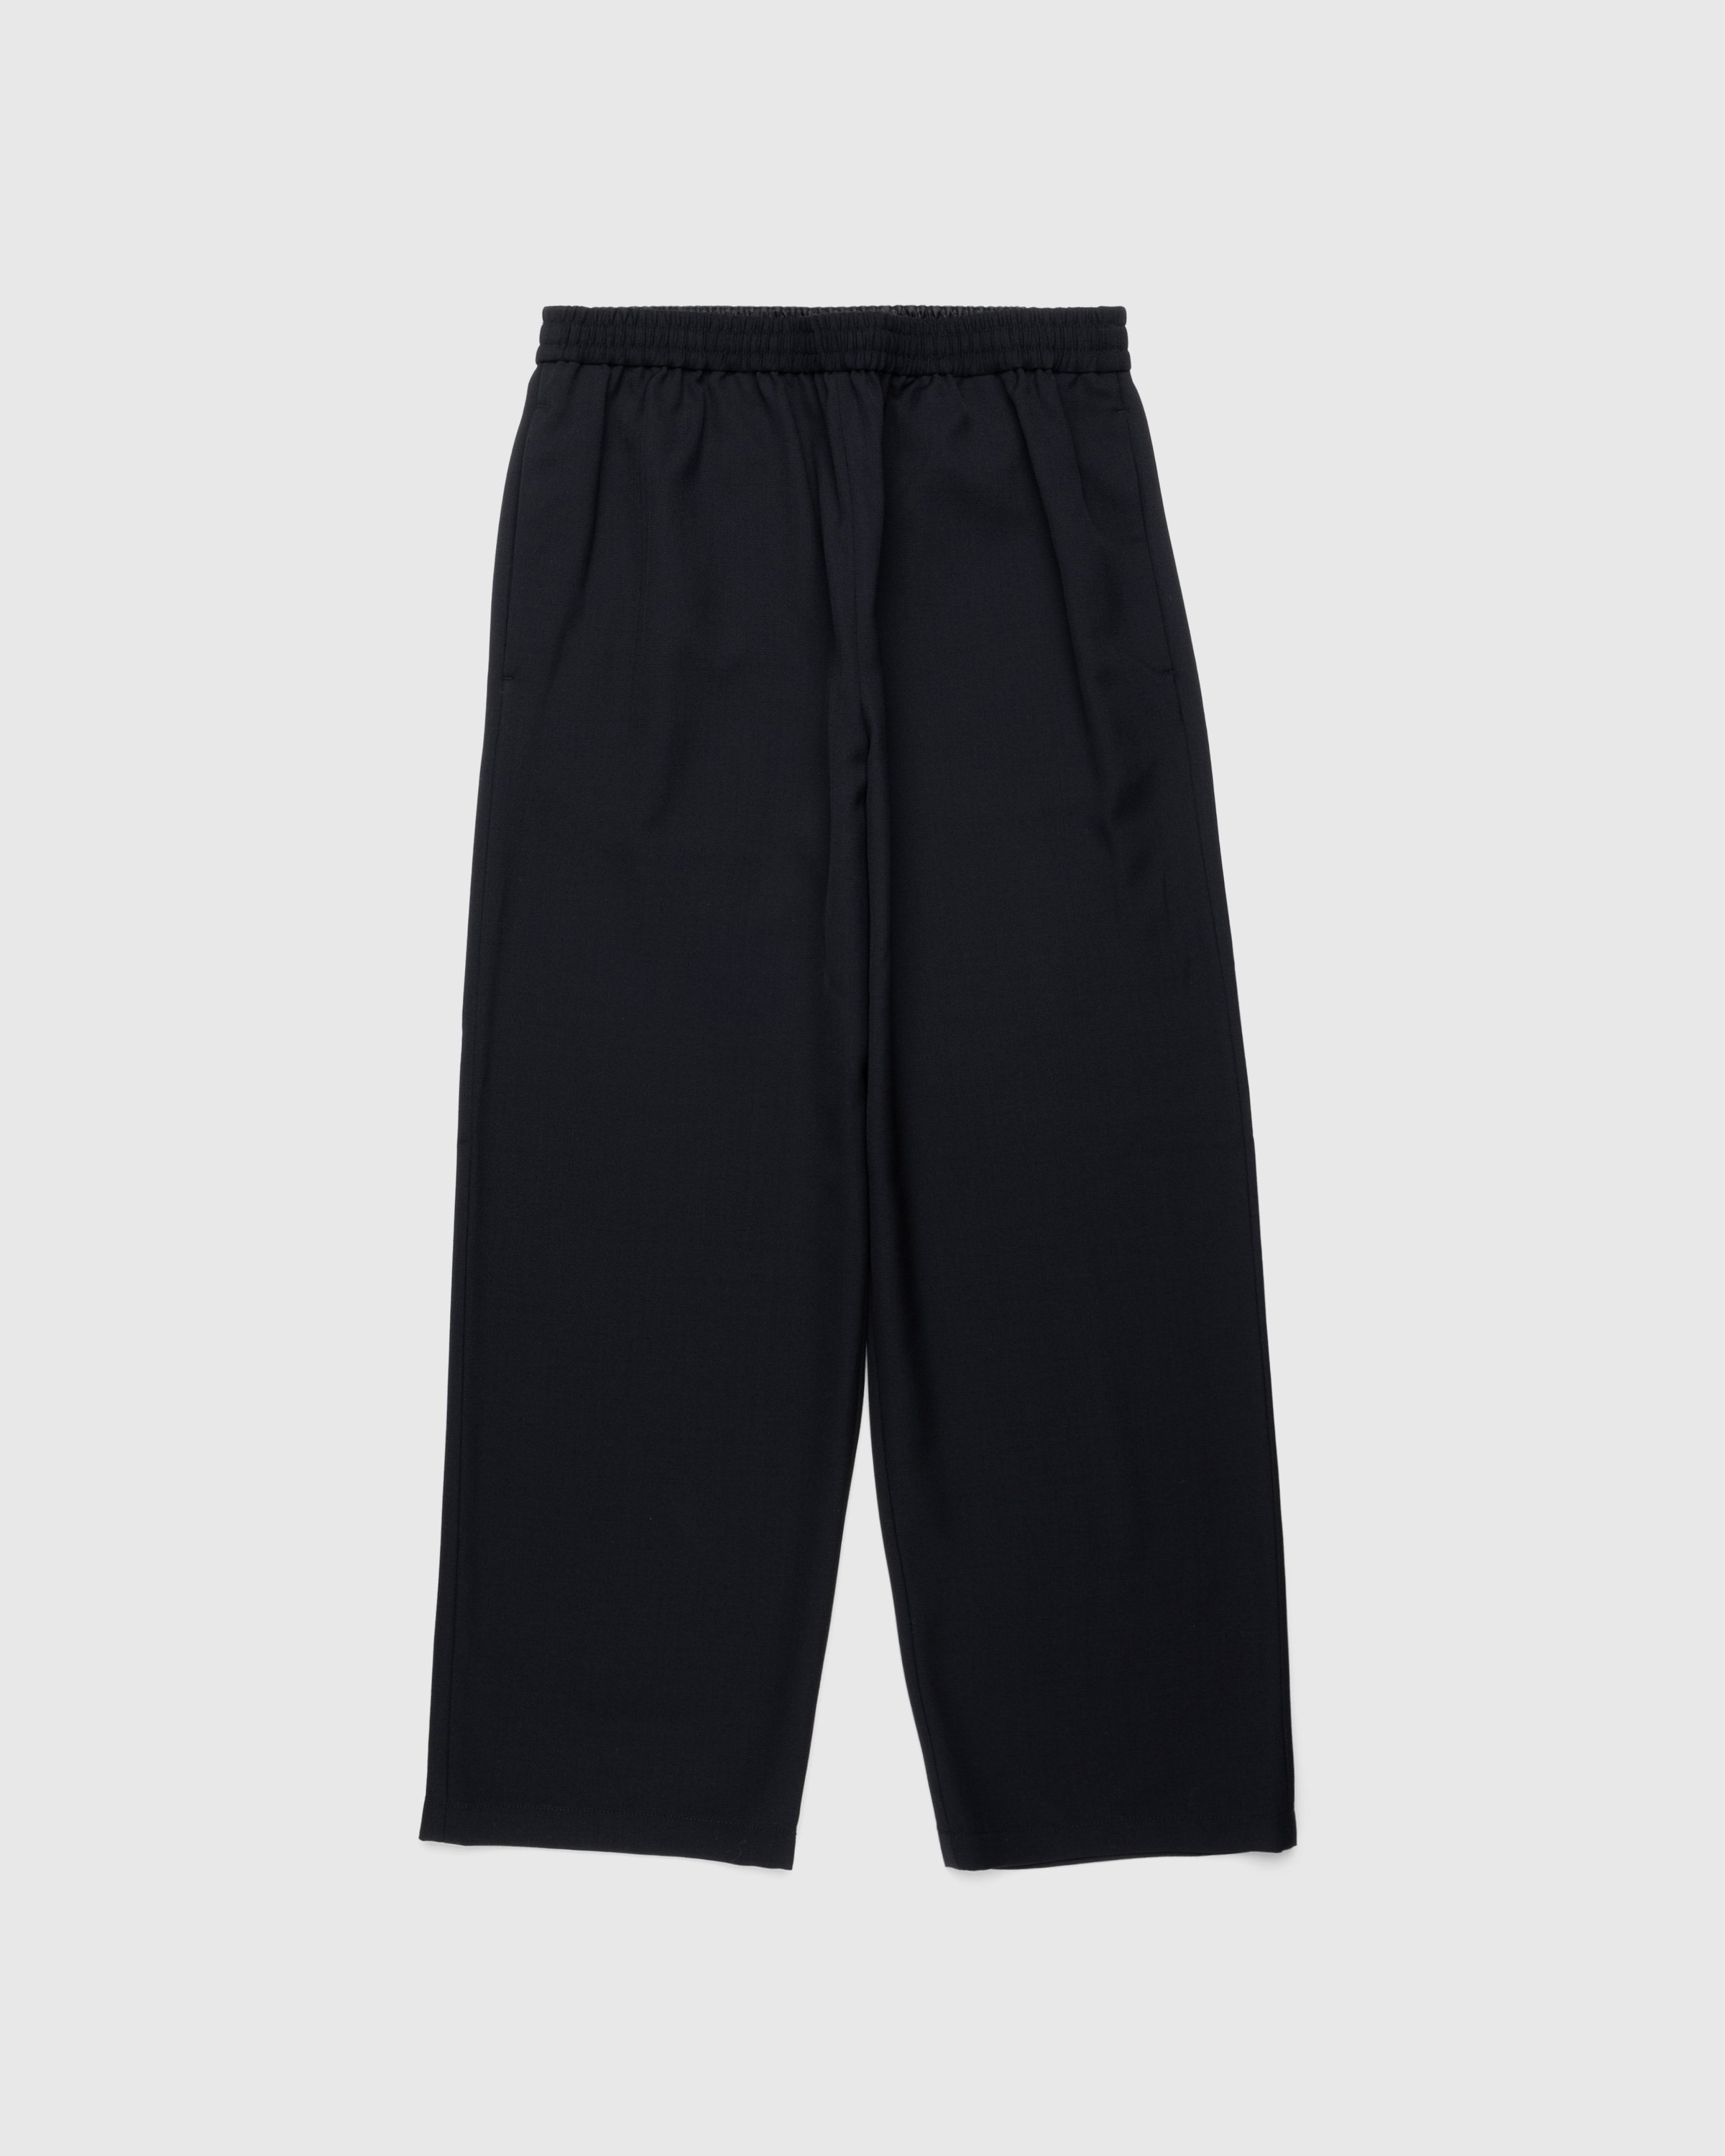 Acne Studios - Tailored Trousers Black - Clothing - Black - Image 1